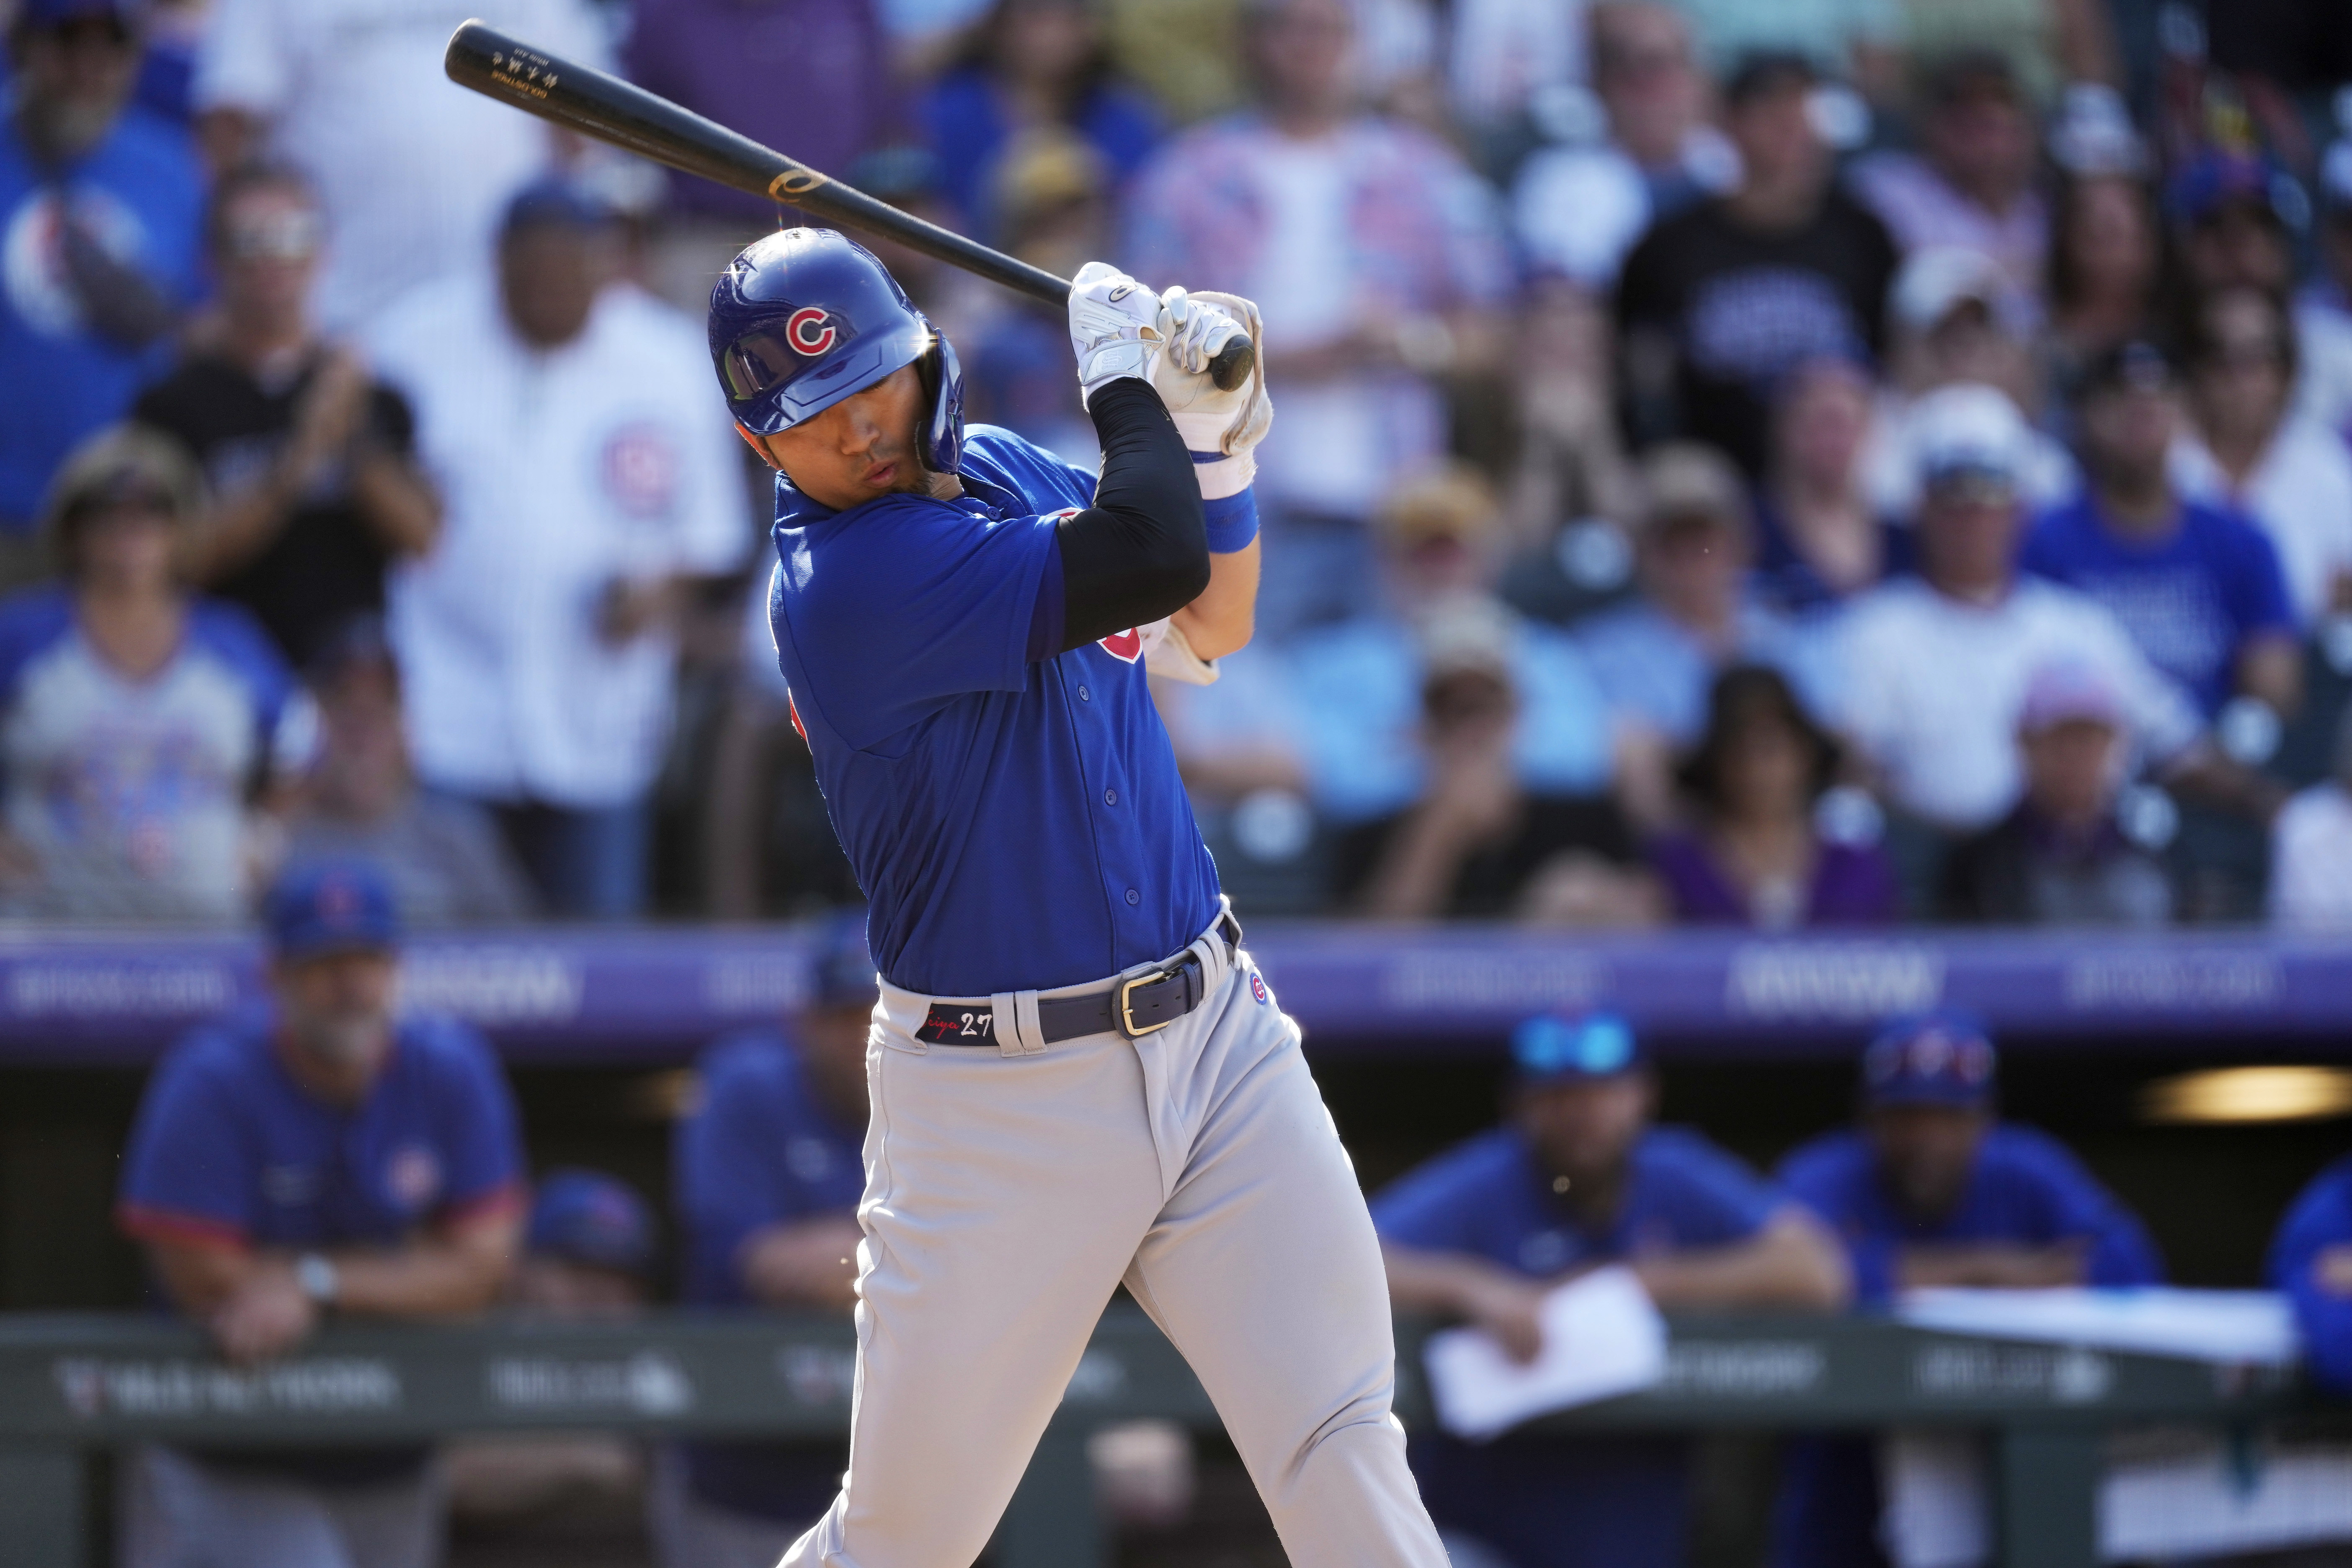 Chicago Cubs: Key matchup on deck after sloppy series loss